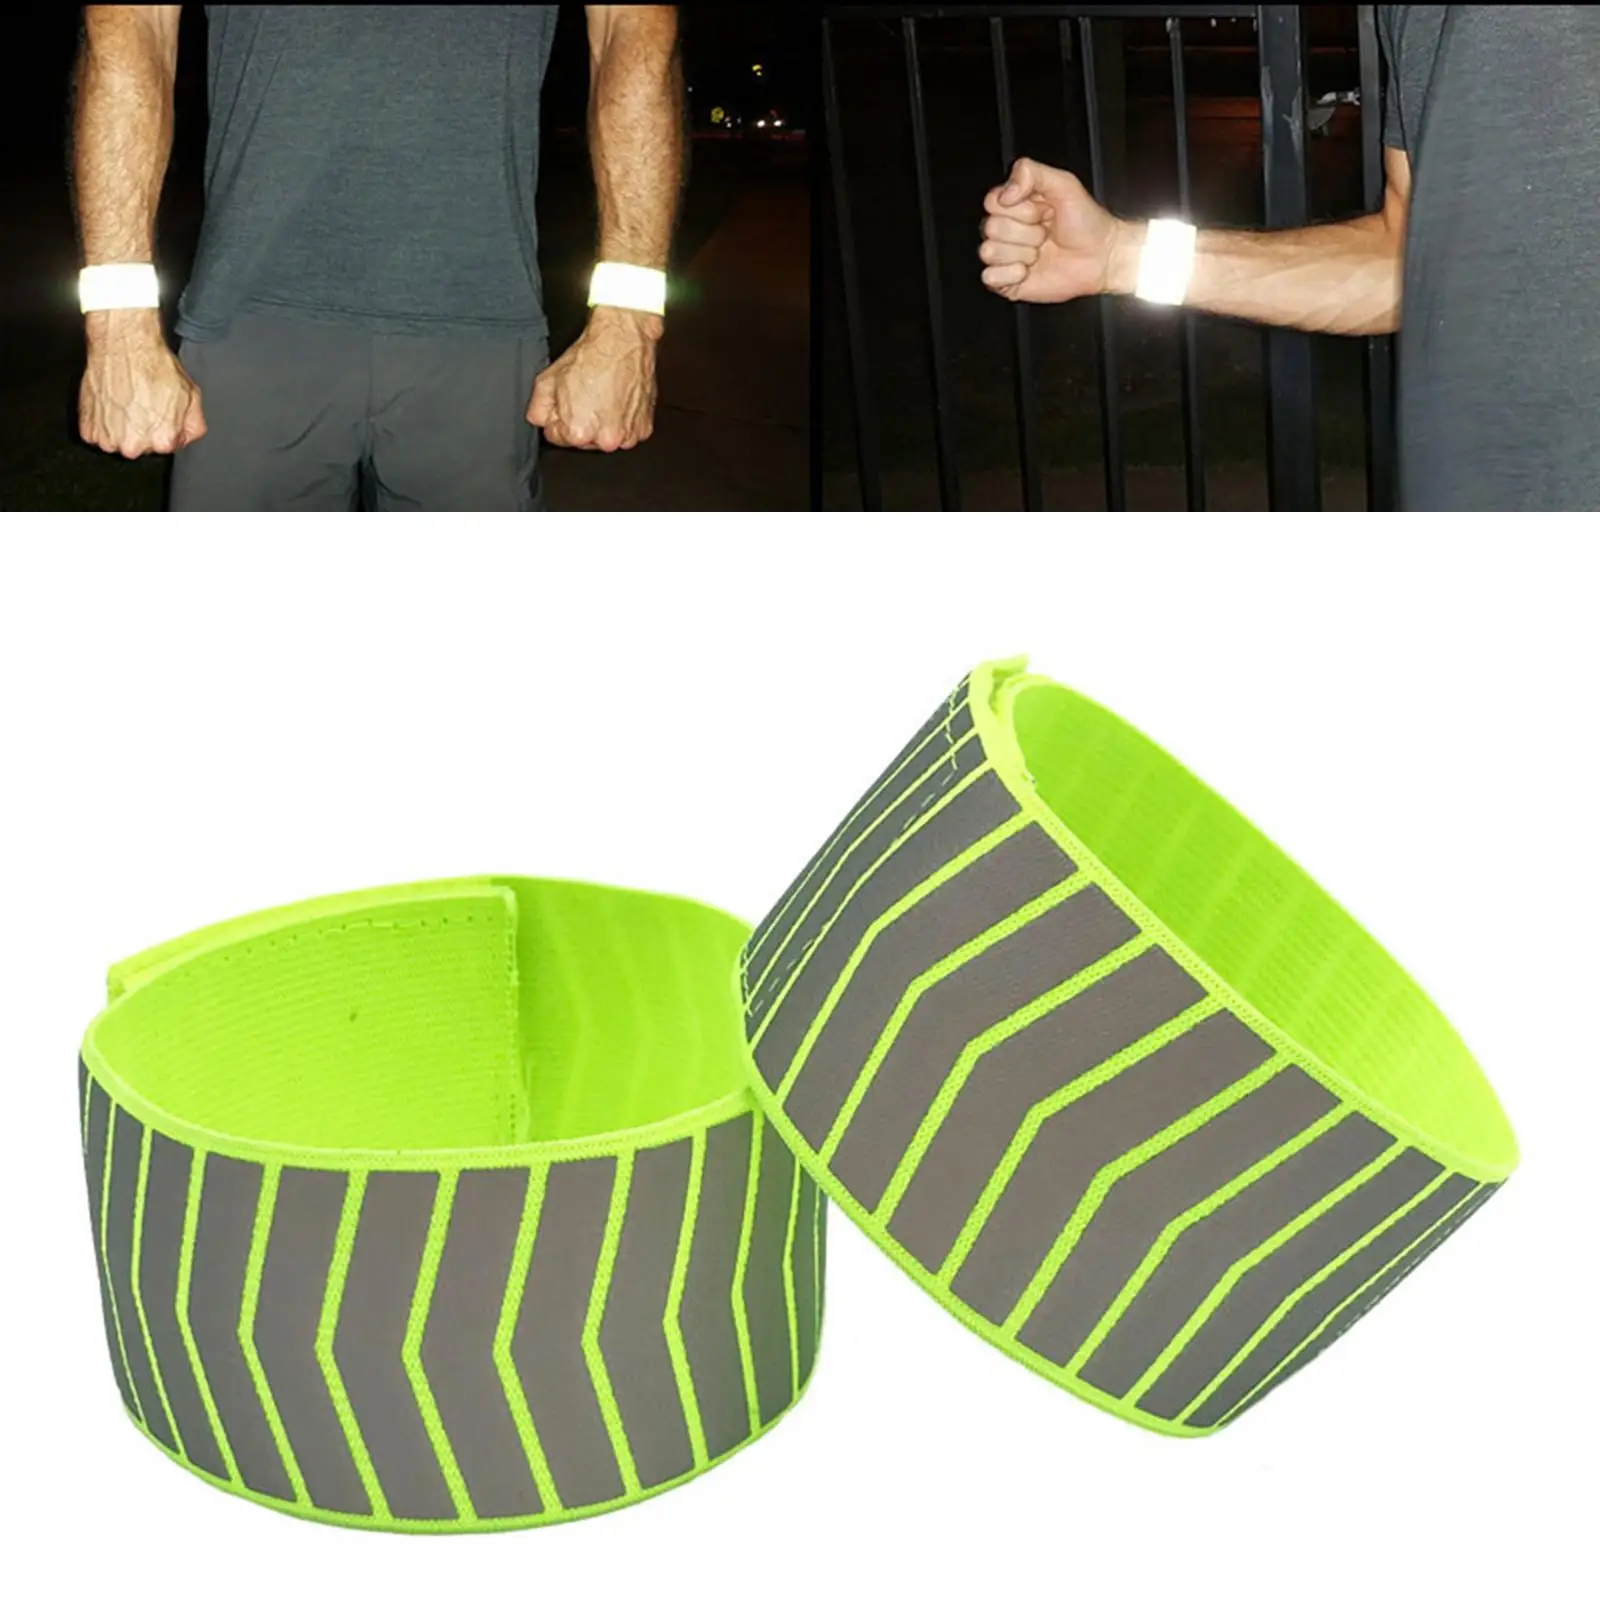 2 Pieces Reflective Running Armbands High Visibility Gear for Running Sport